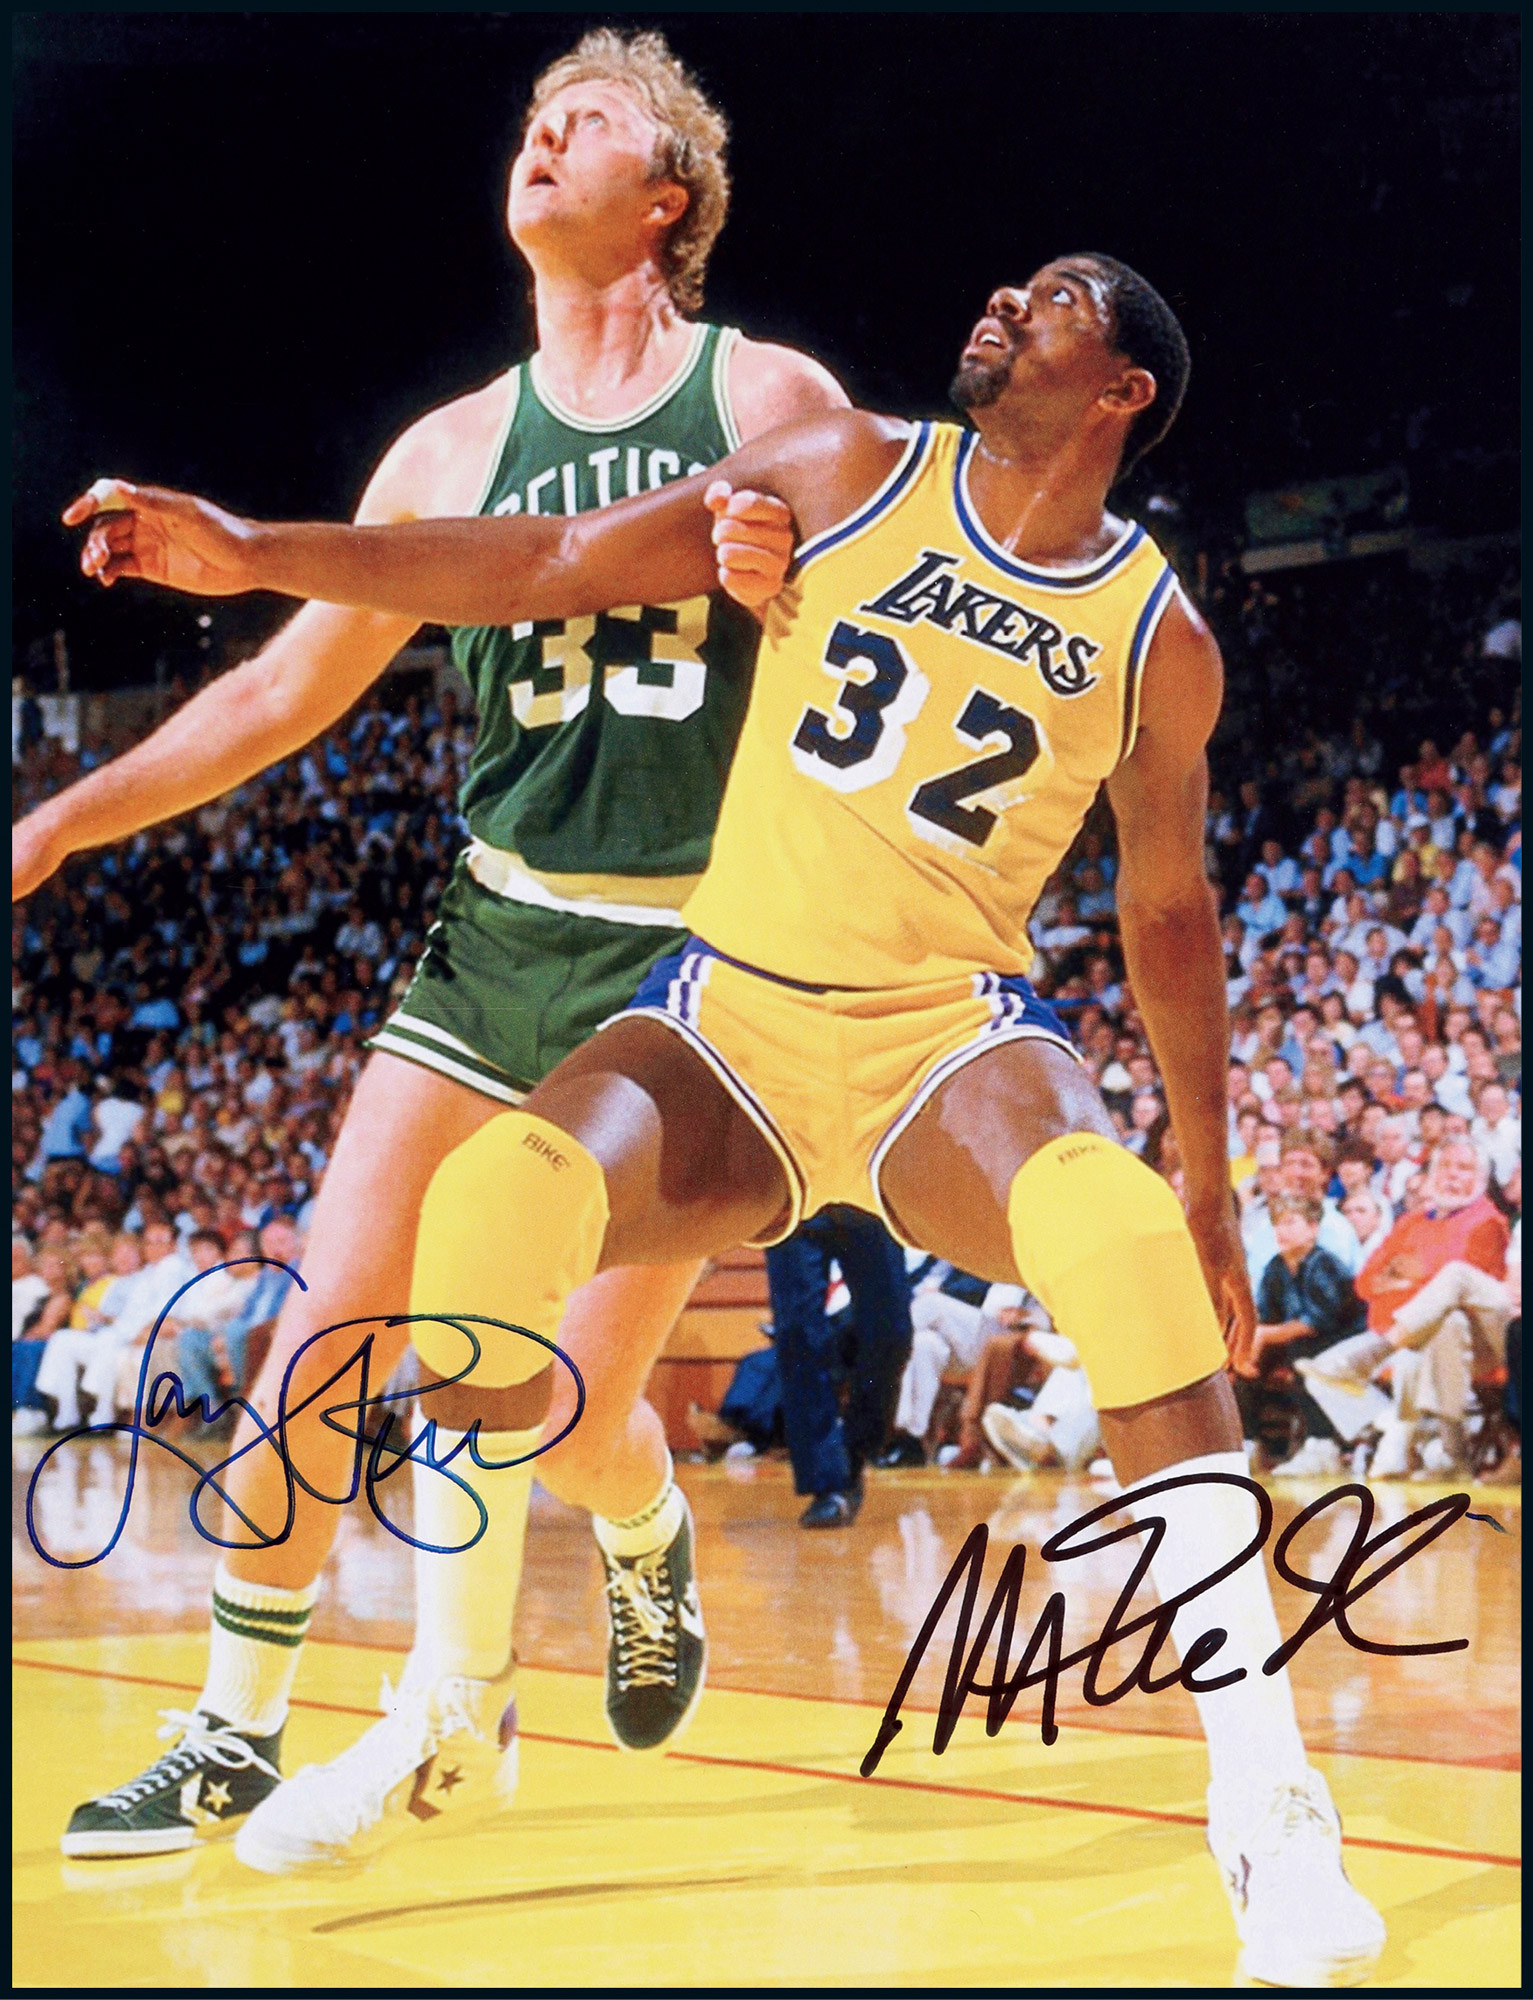 The autographed photo of Magic Johnson and Larry Bird, the legendary NBA star, with a certificate